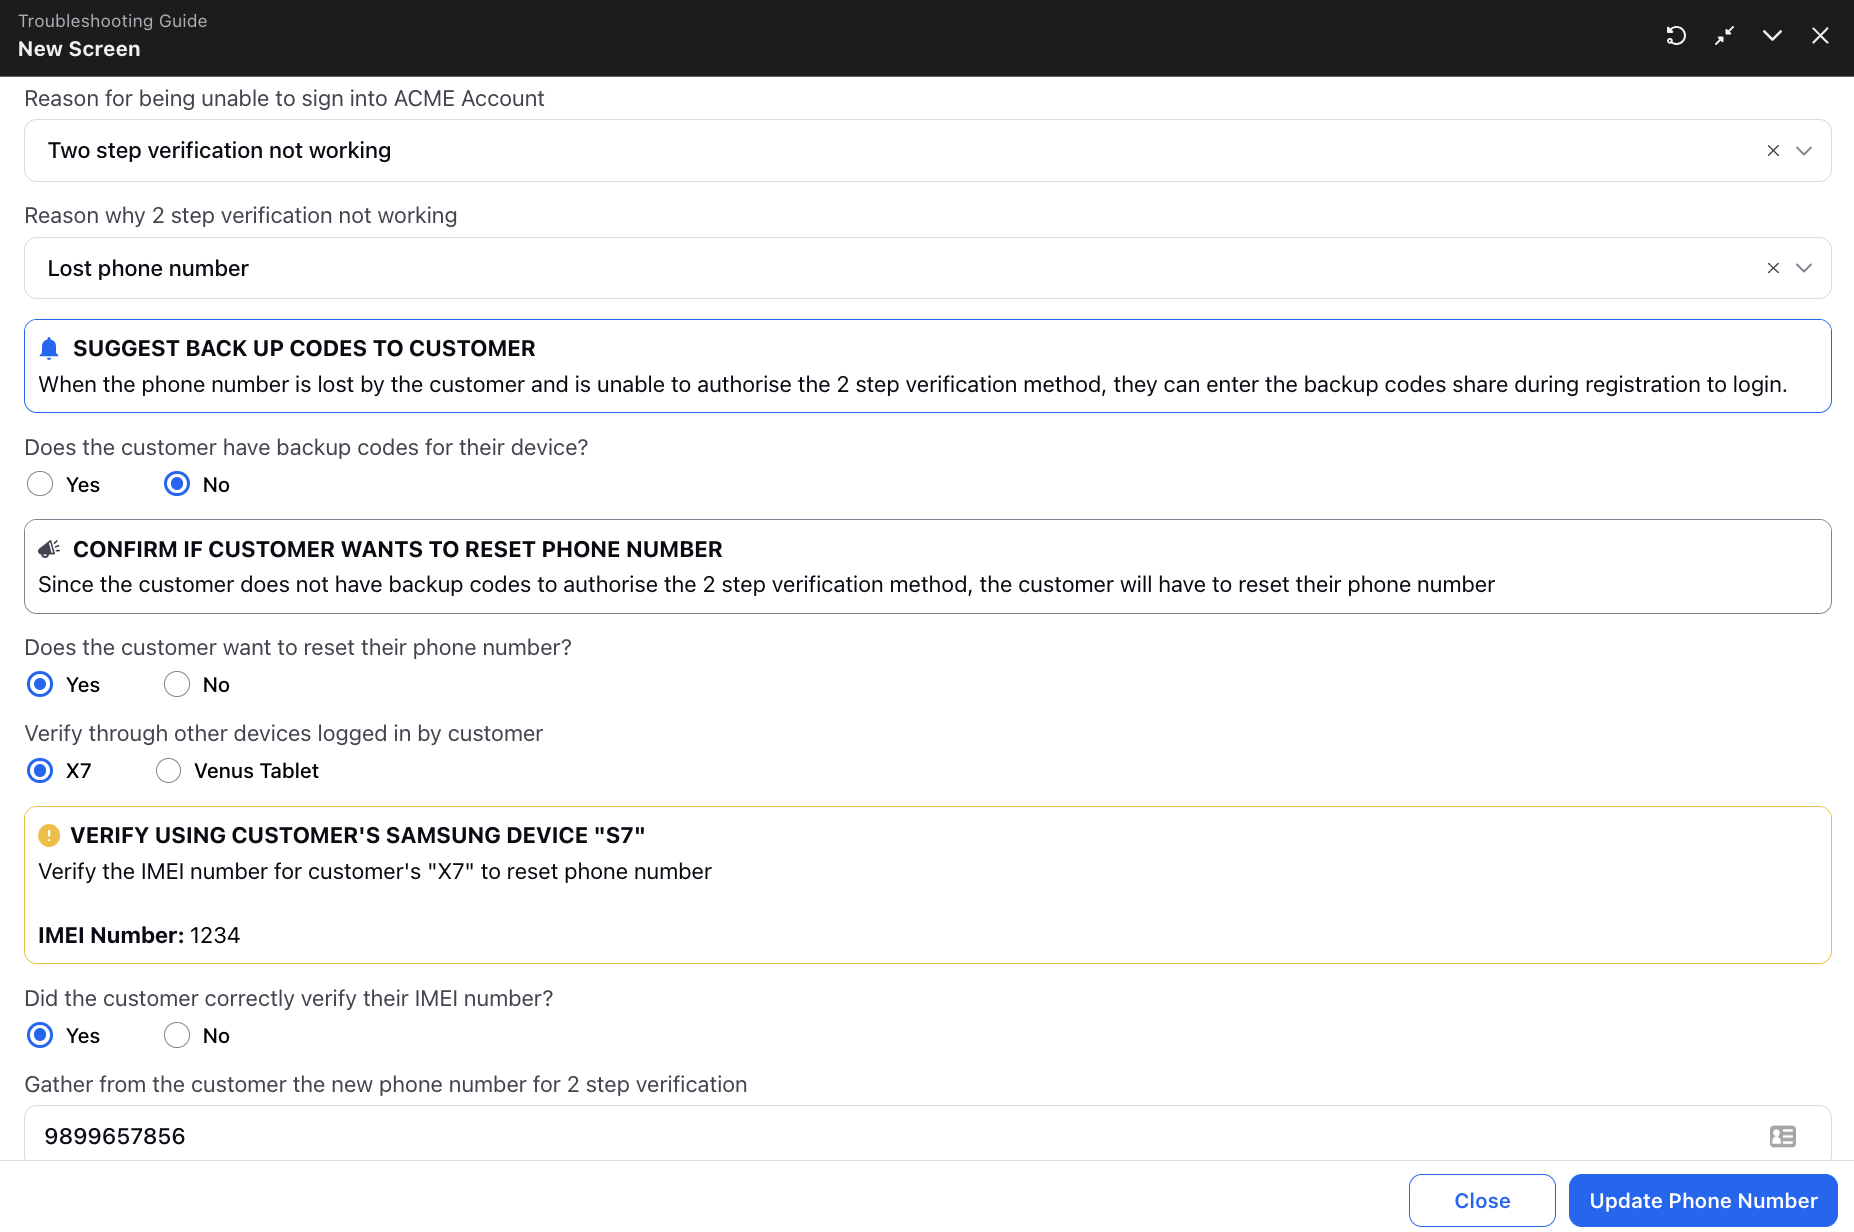 A product screenshot showing a troubleshooting guide that has a pre-built form with specific questions related to a customer's issue.